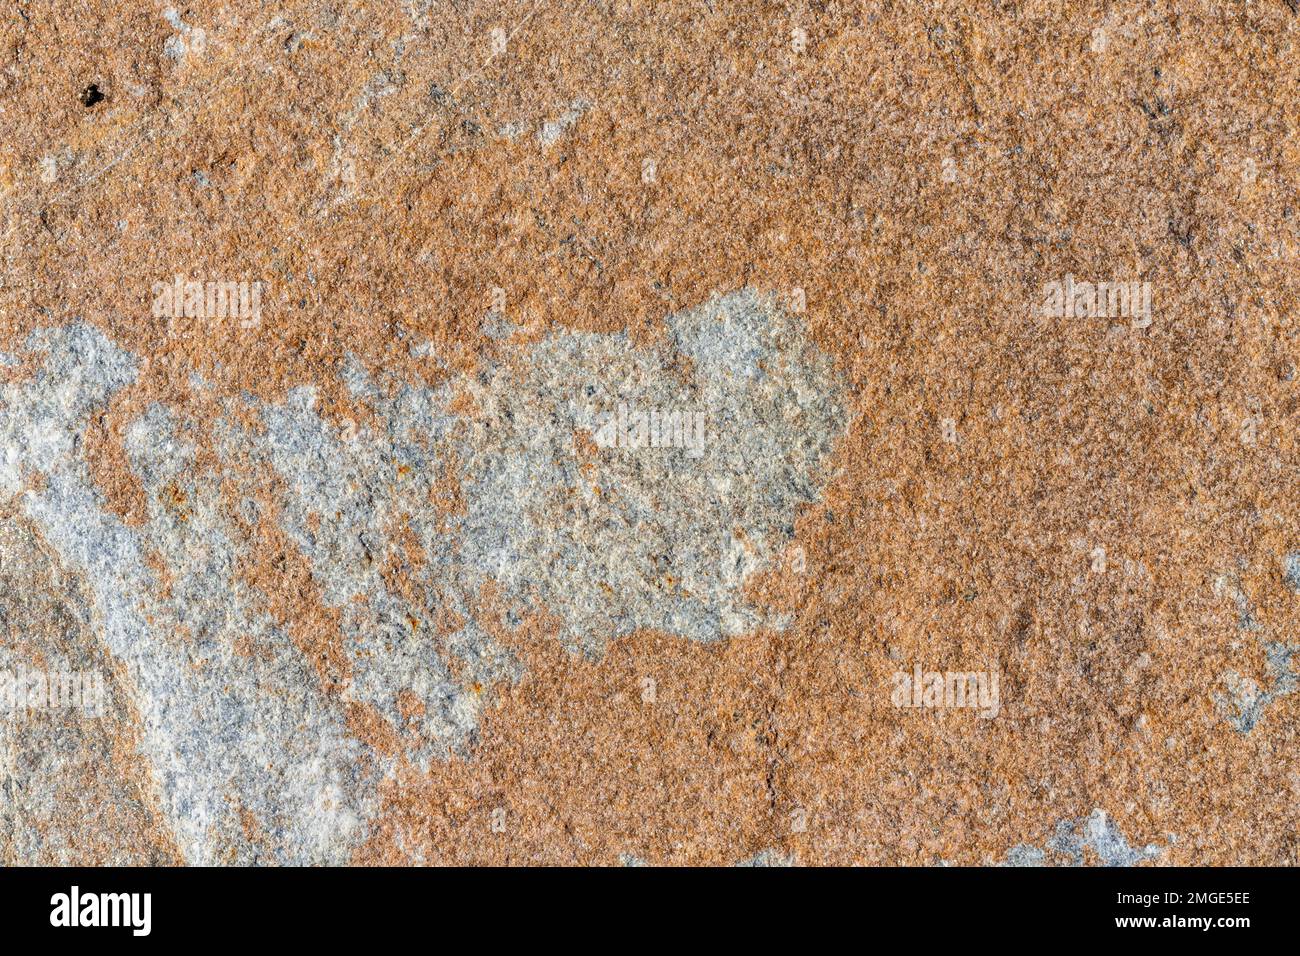 https://c8.alamy.com/comp/2MGE5EE/stone-surface-natural-texture-background-2MGE5EE.jpg